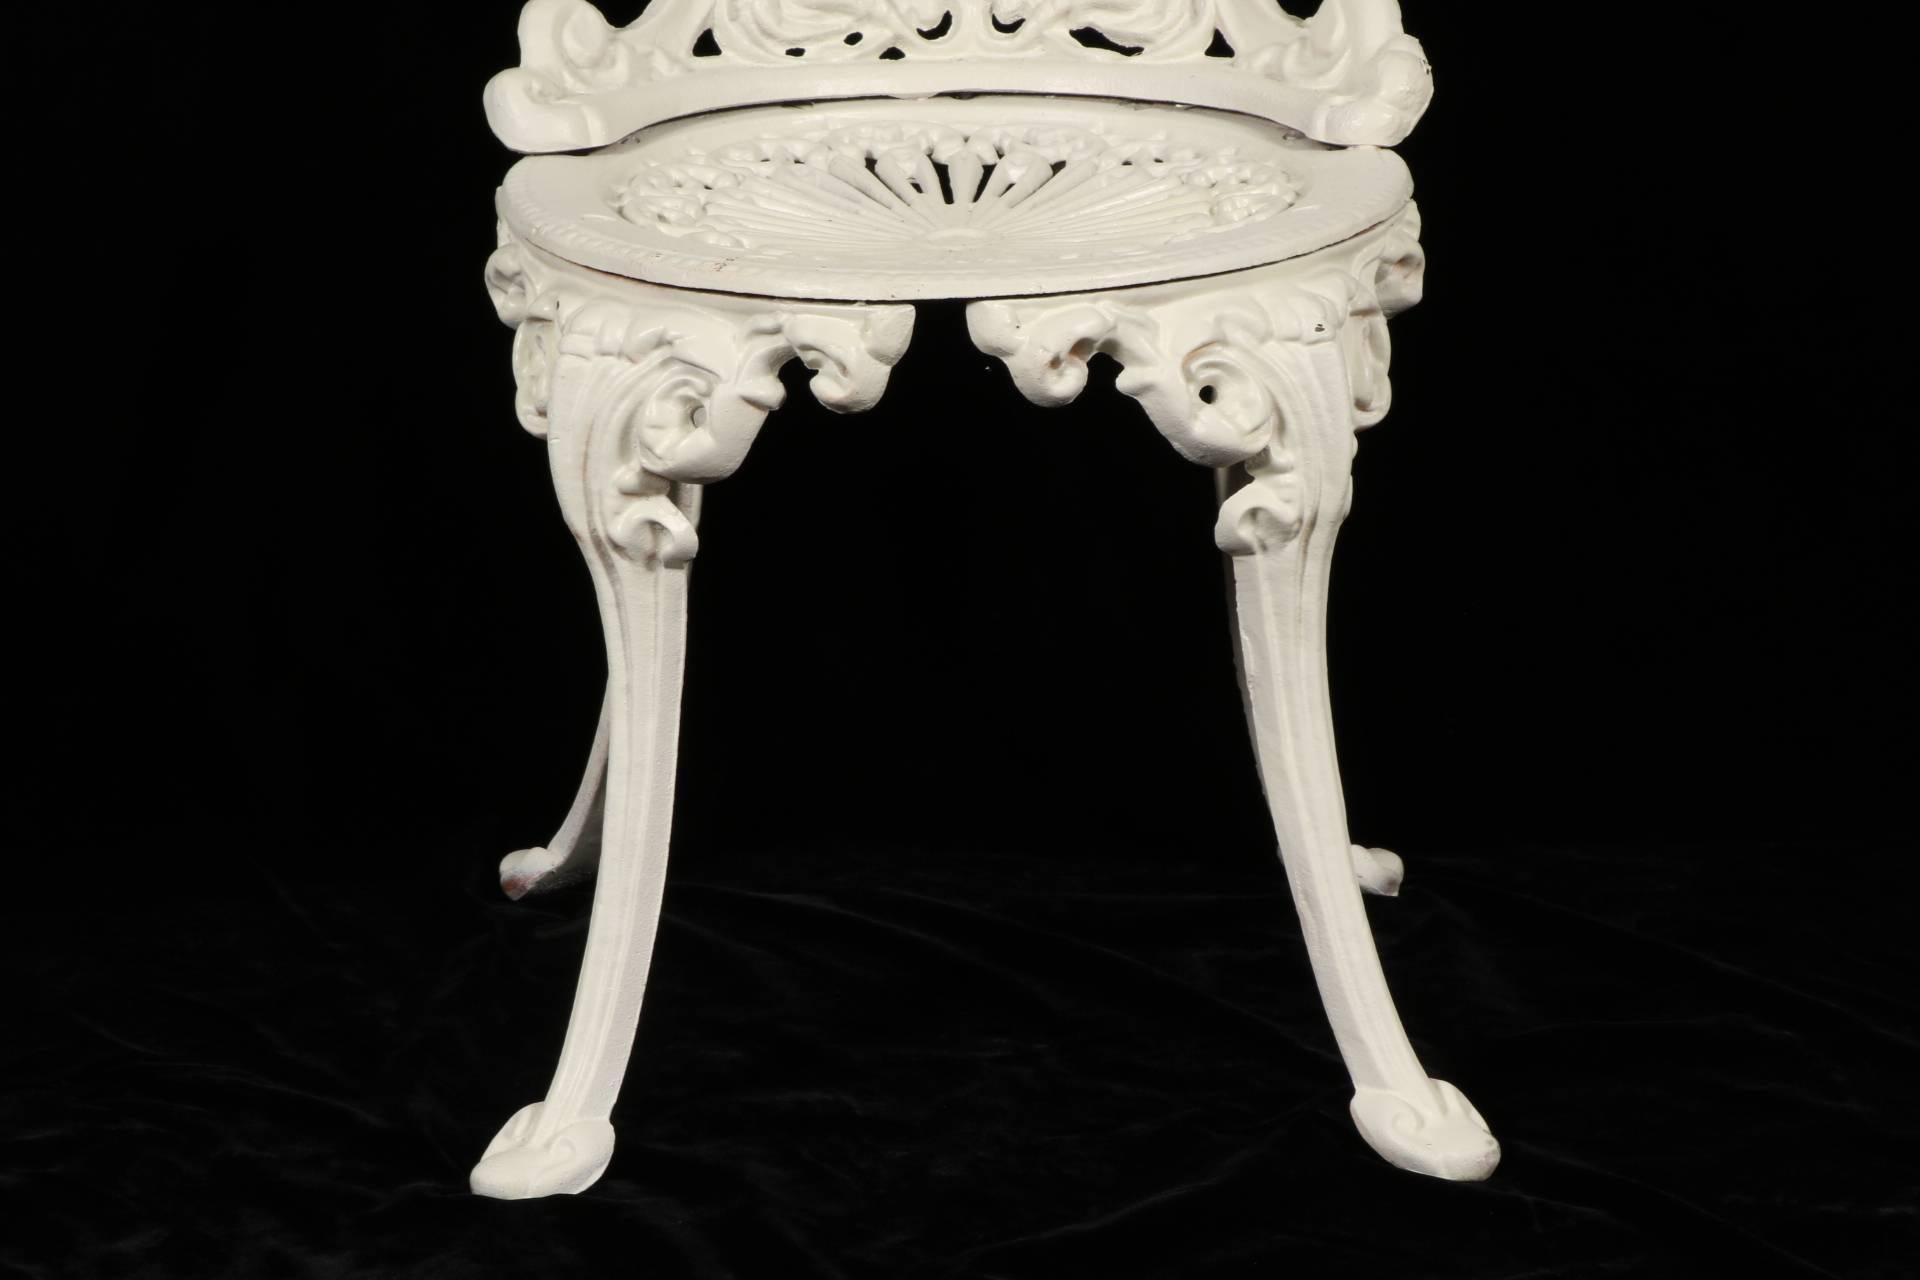 In white paint, openwork shaped and scrolled backs with centre medallions, round pierced seats in a sunburst pattern. Cabriole legs with acanthus scrolled tops and ending in leafy feet.
Condition: very good.